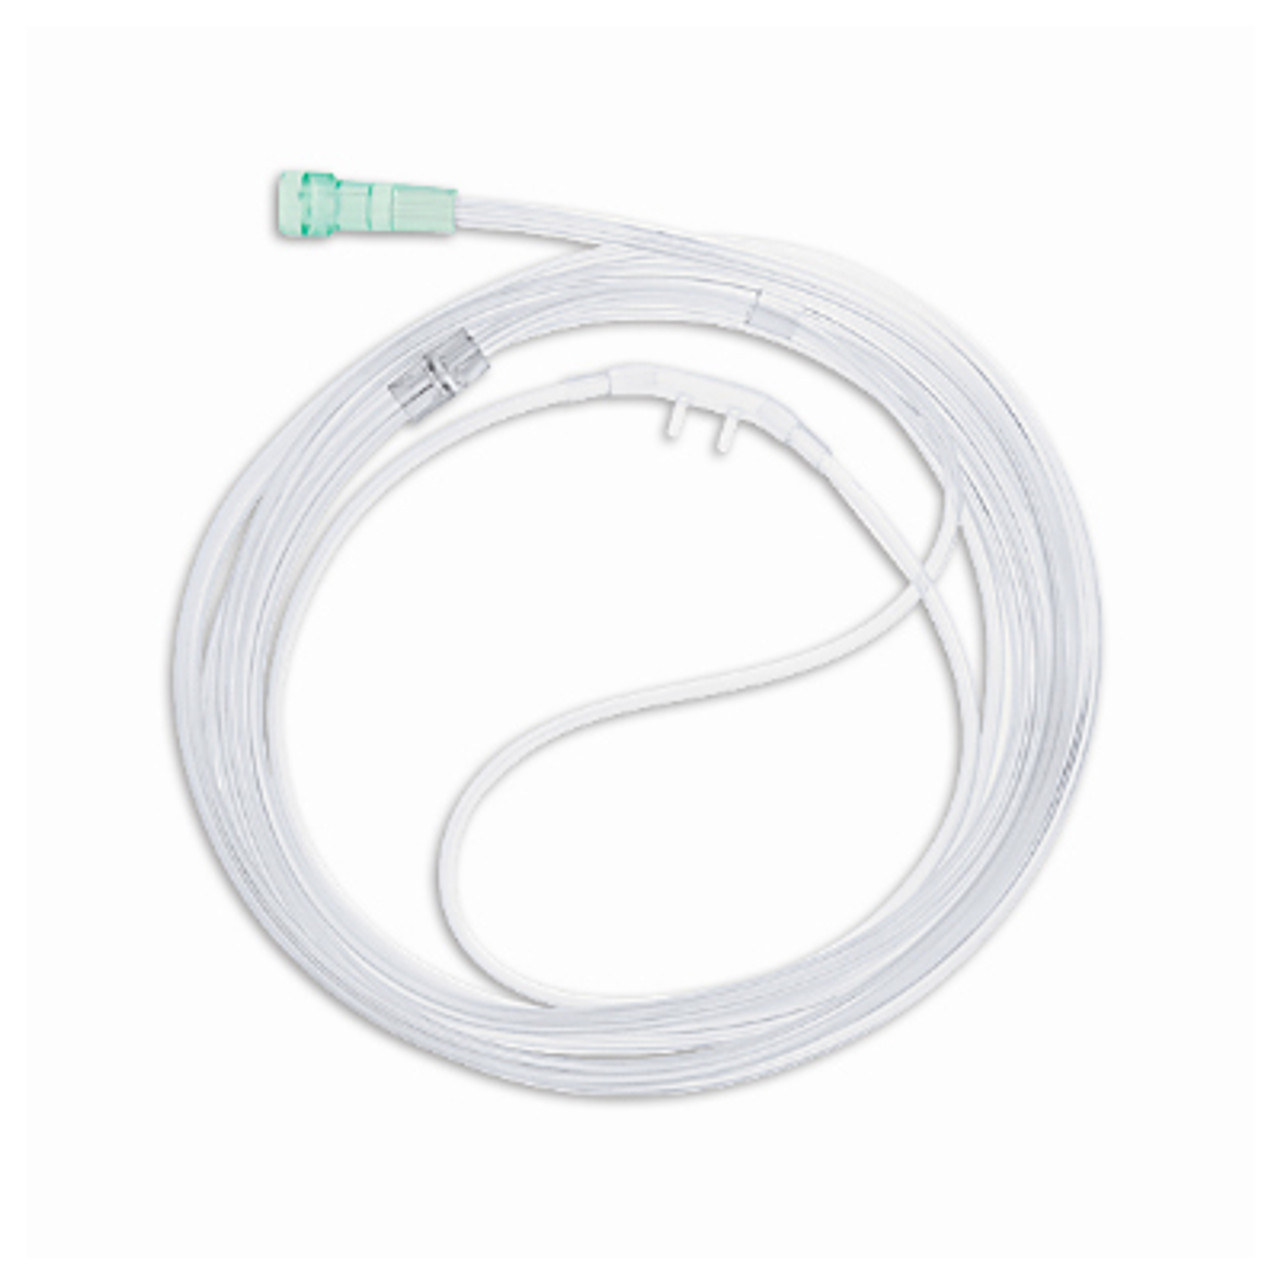 Crosstex Accutron Oxygen Cannula Tubing Adult, 7 ft Curved Tip, (LF), 10/pk